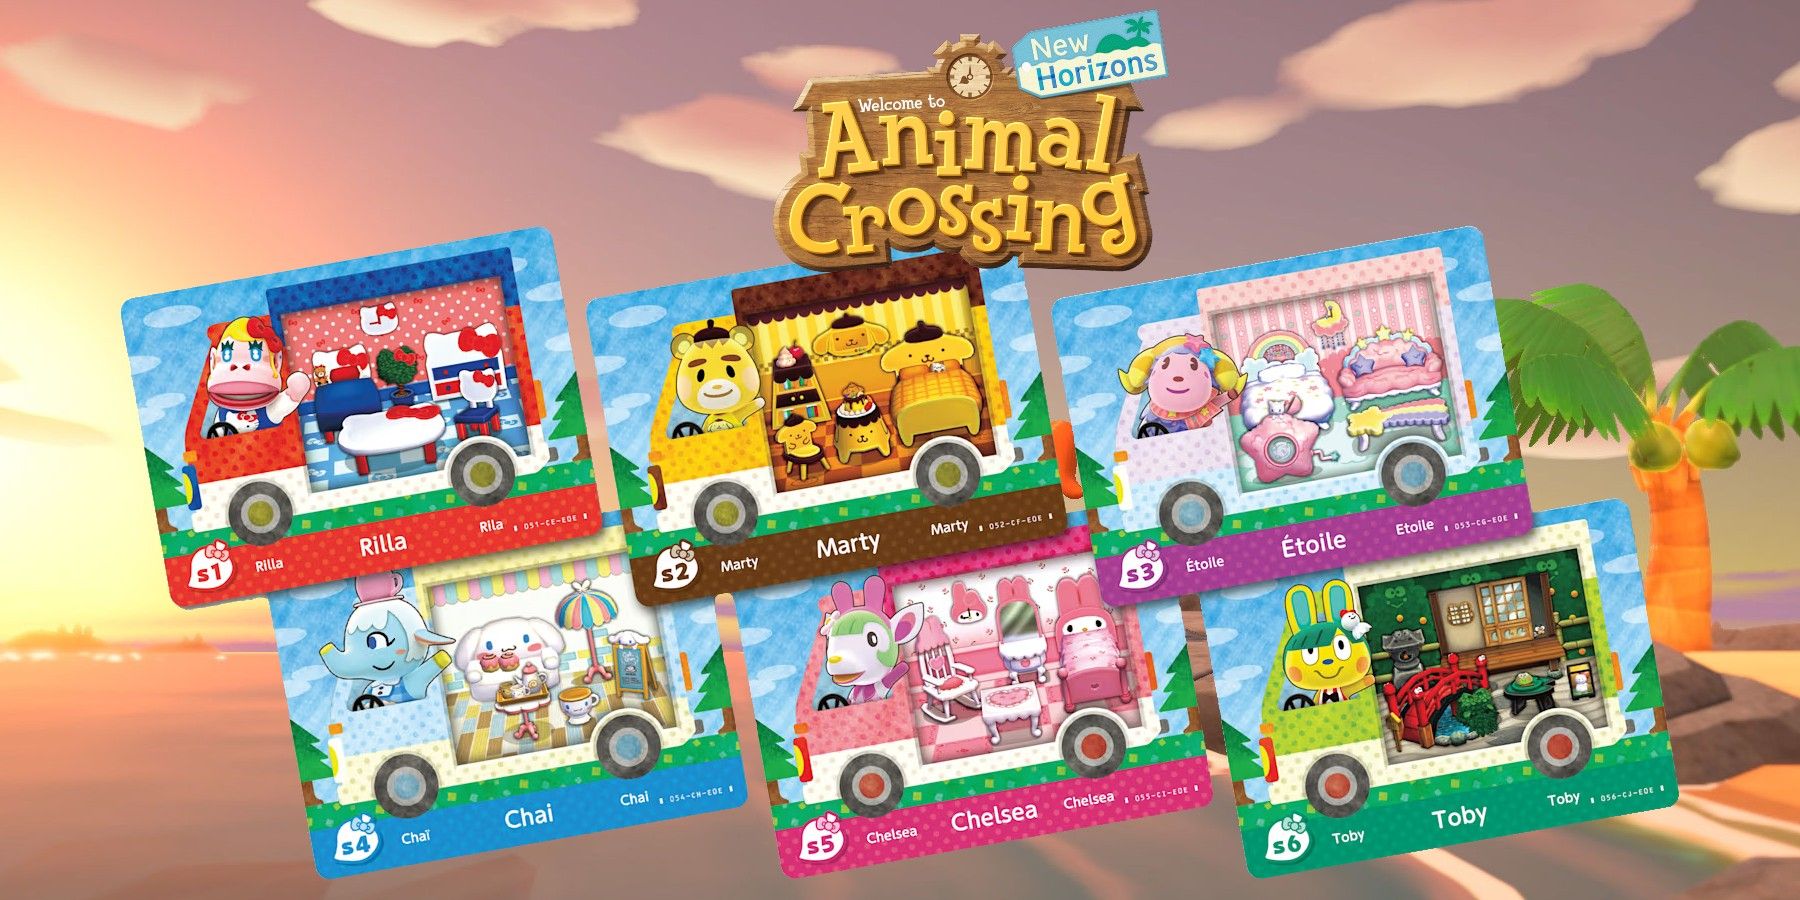 Animal Crossing Collaboration Could Be a Hit